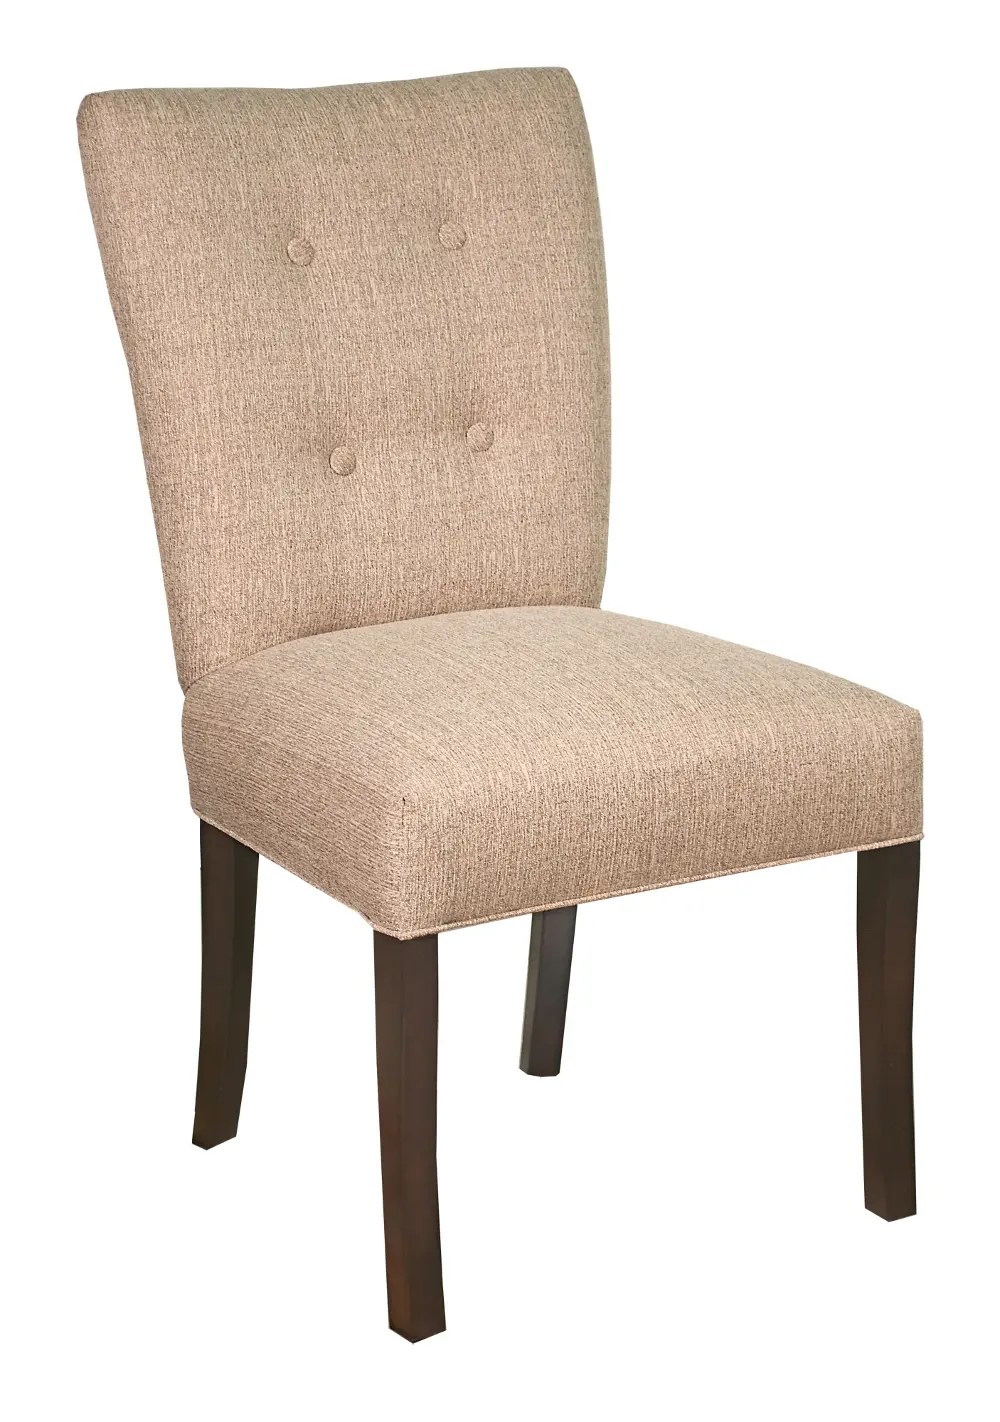 Barnum Oats Upholstered Dining Room Chair - Julia Collection-1